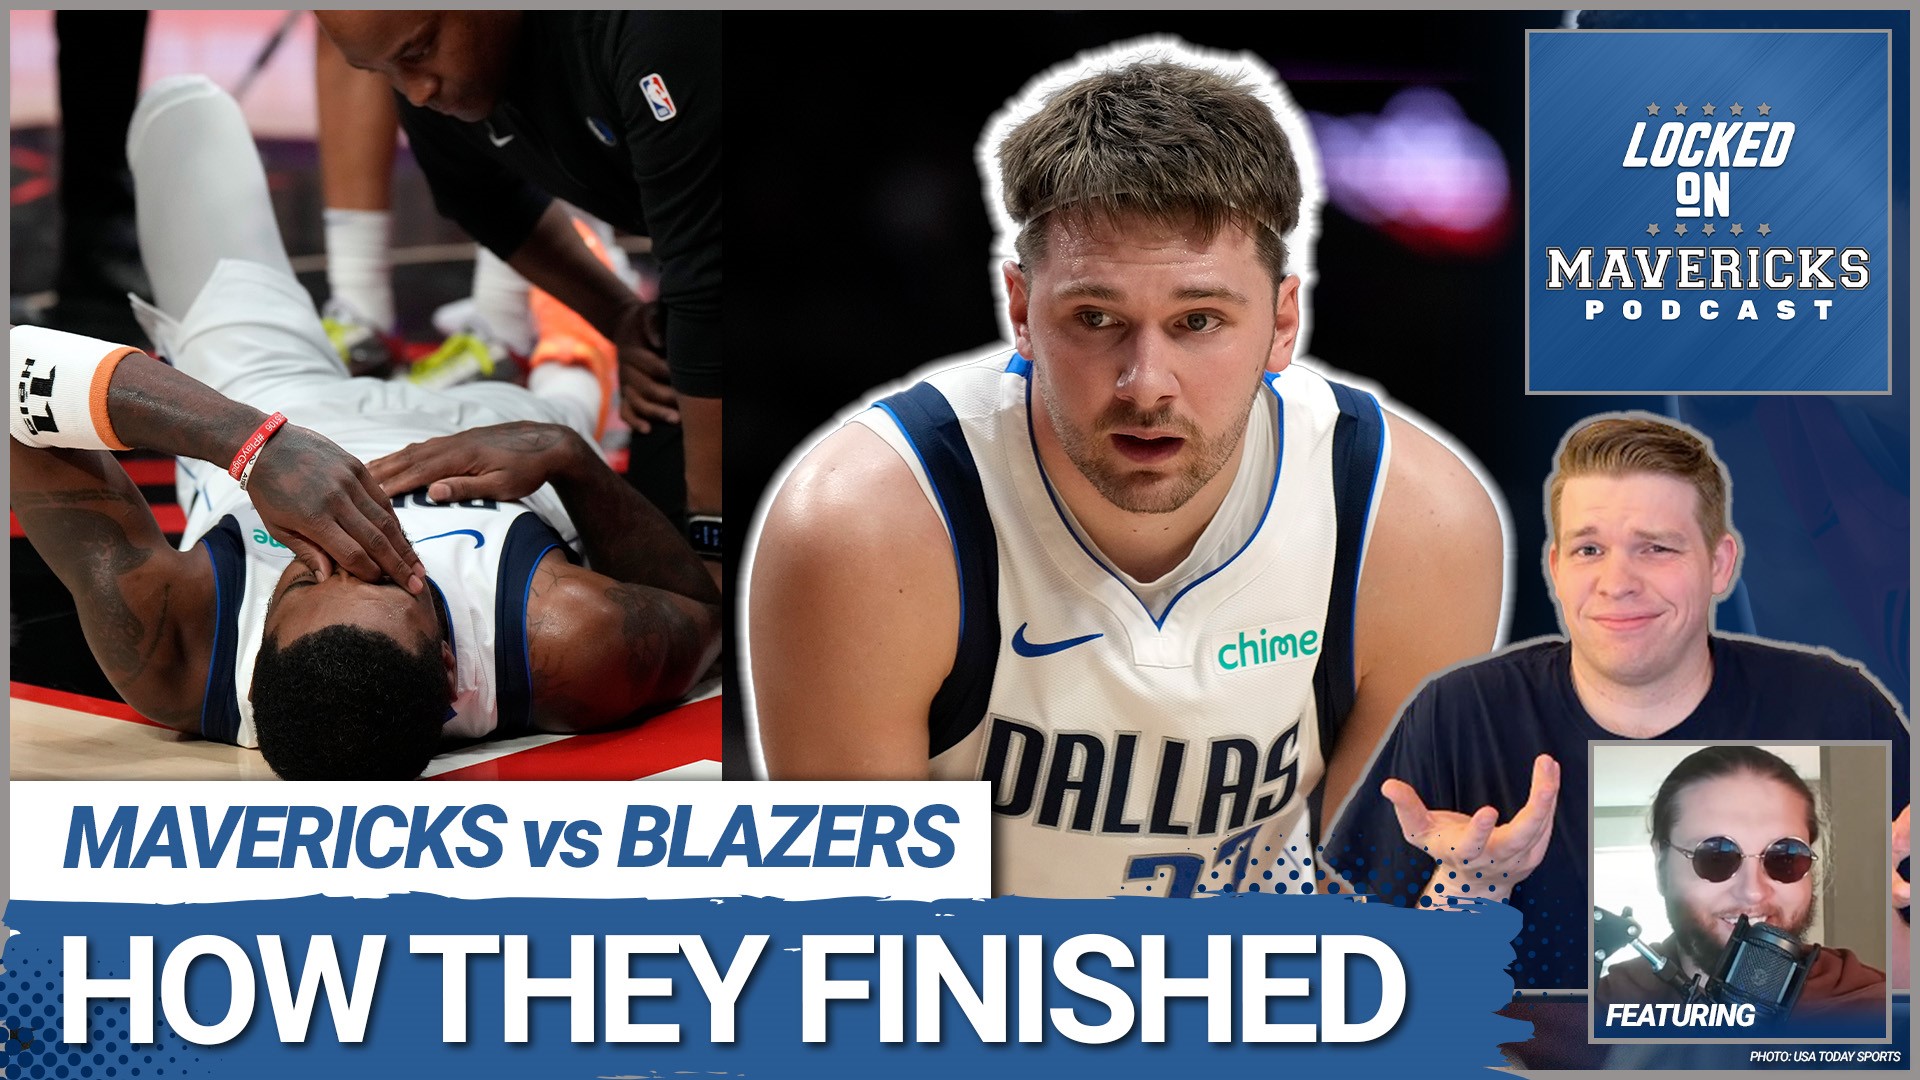 Nick Angstadt & Slightly Biased breakdown the Dallas Mavericks vs Portland Trail Blazers game, Luka Doncic's great response, and Kyrie Irving's injury.